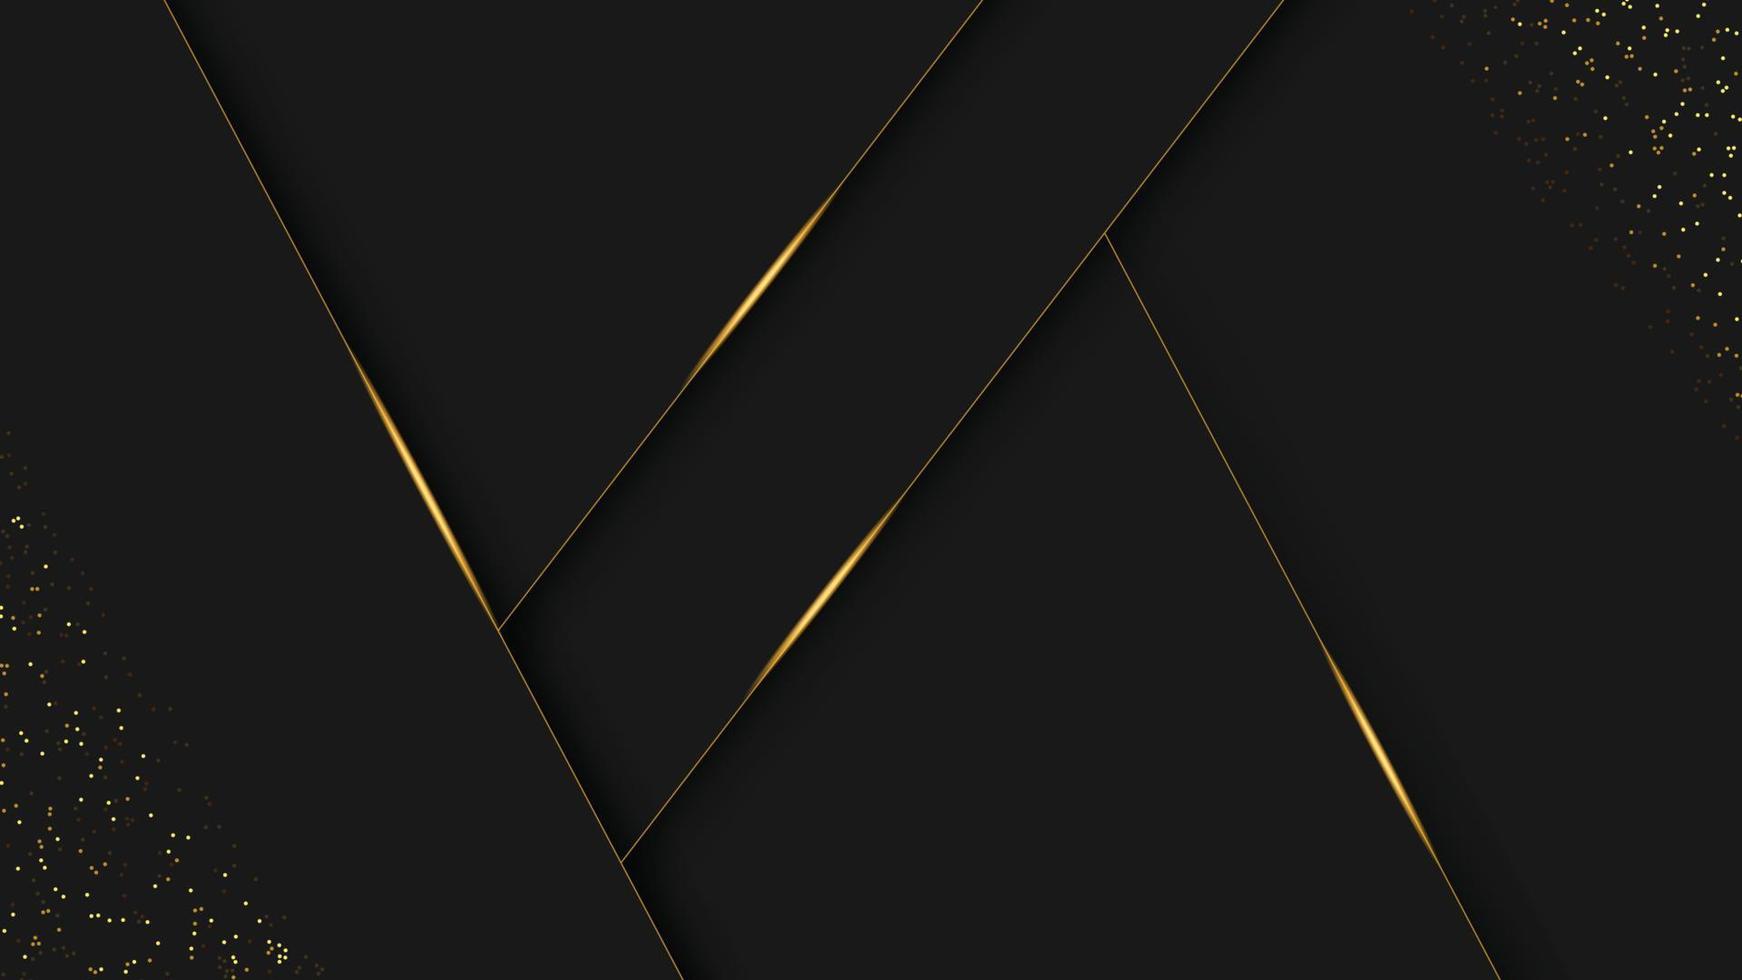 Black and golden lines abstract background. gold light luxury design modern futuristic background vector illustration.